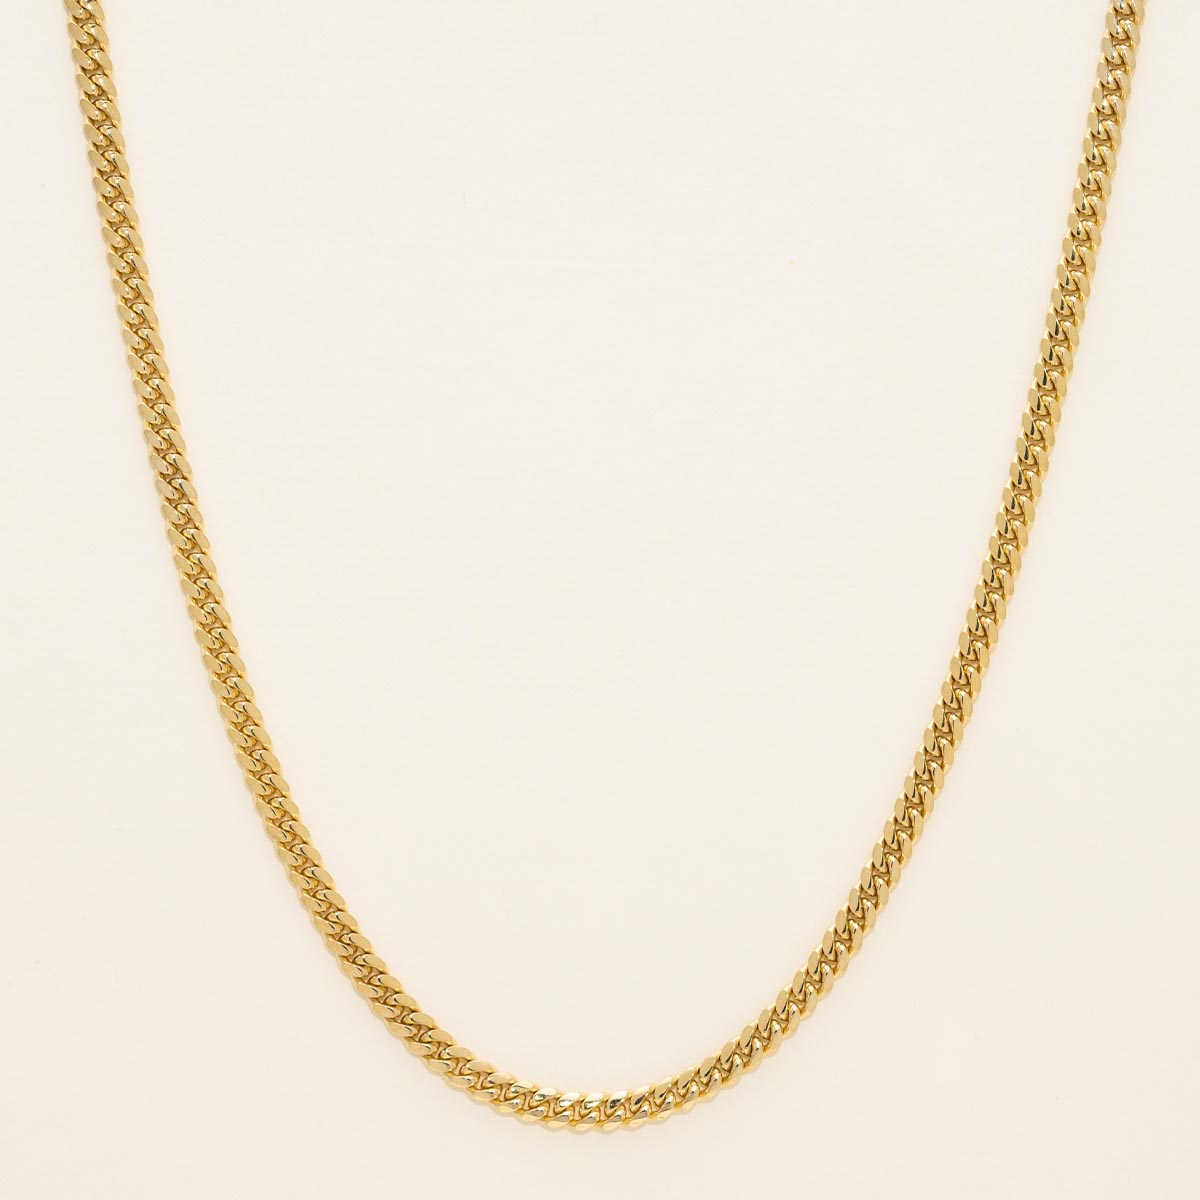 Maimi Cuban Chain in 10kt Yellow Gold (18 inches and 3.9mm wide)